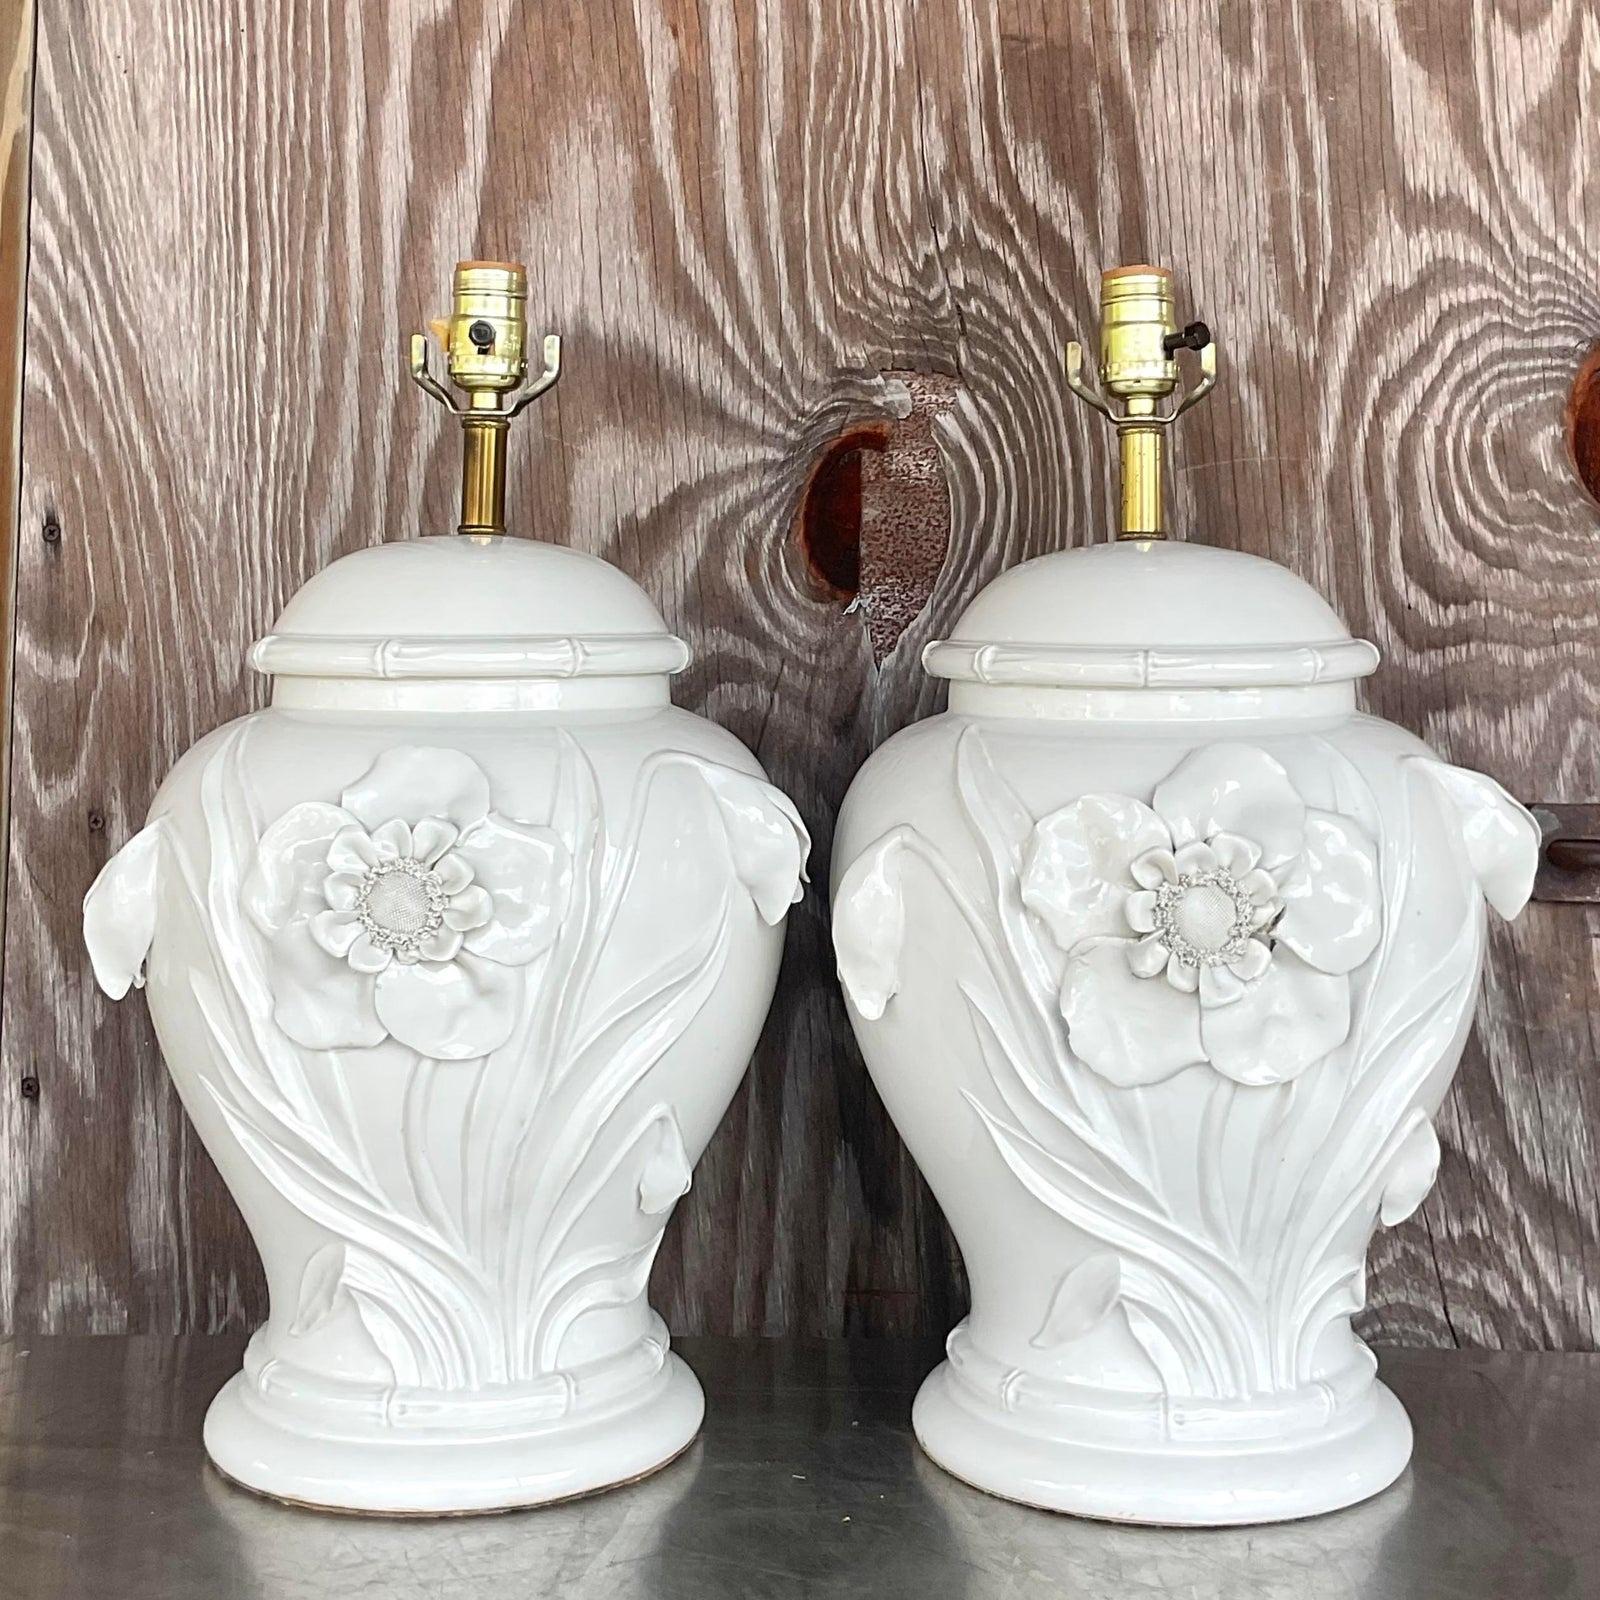 Late 20th Century Vintage Boho Glazed Ceramic Floral Lamps - a Pair